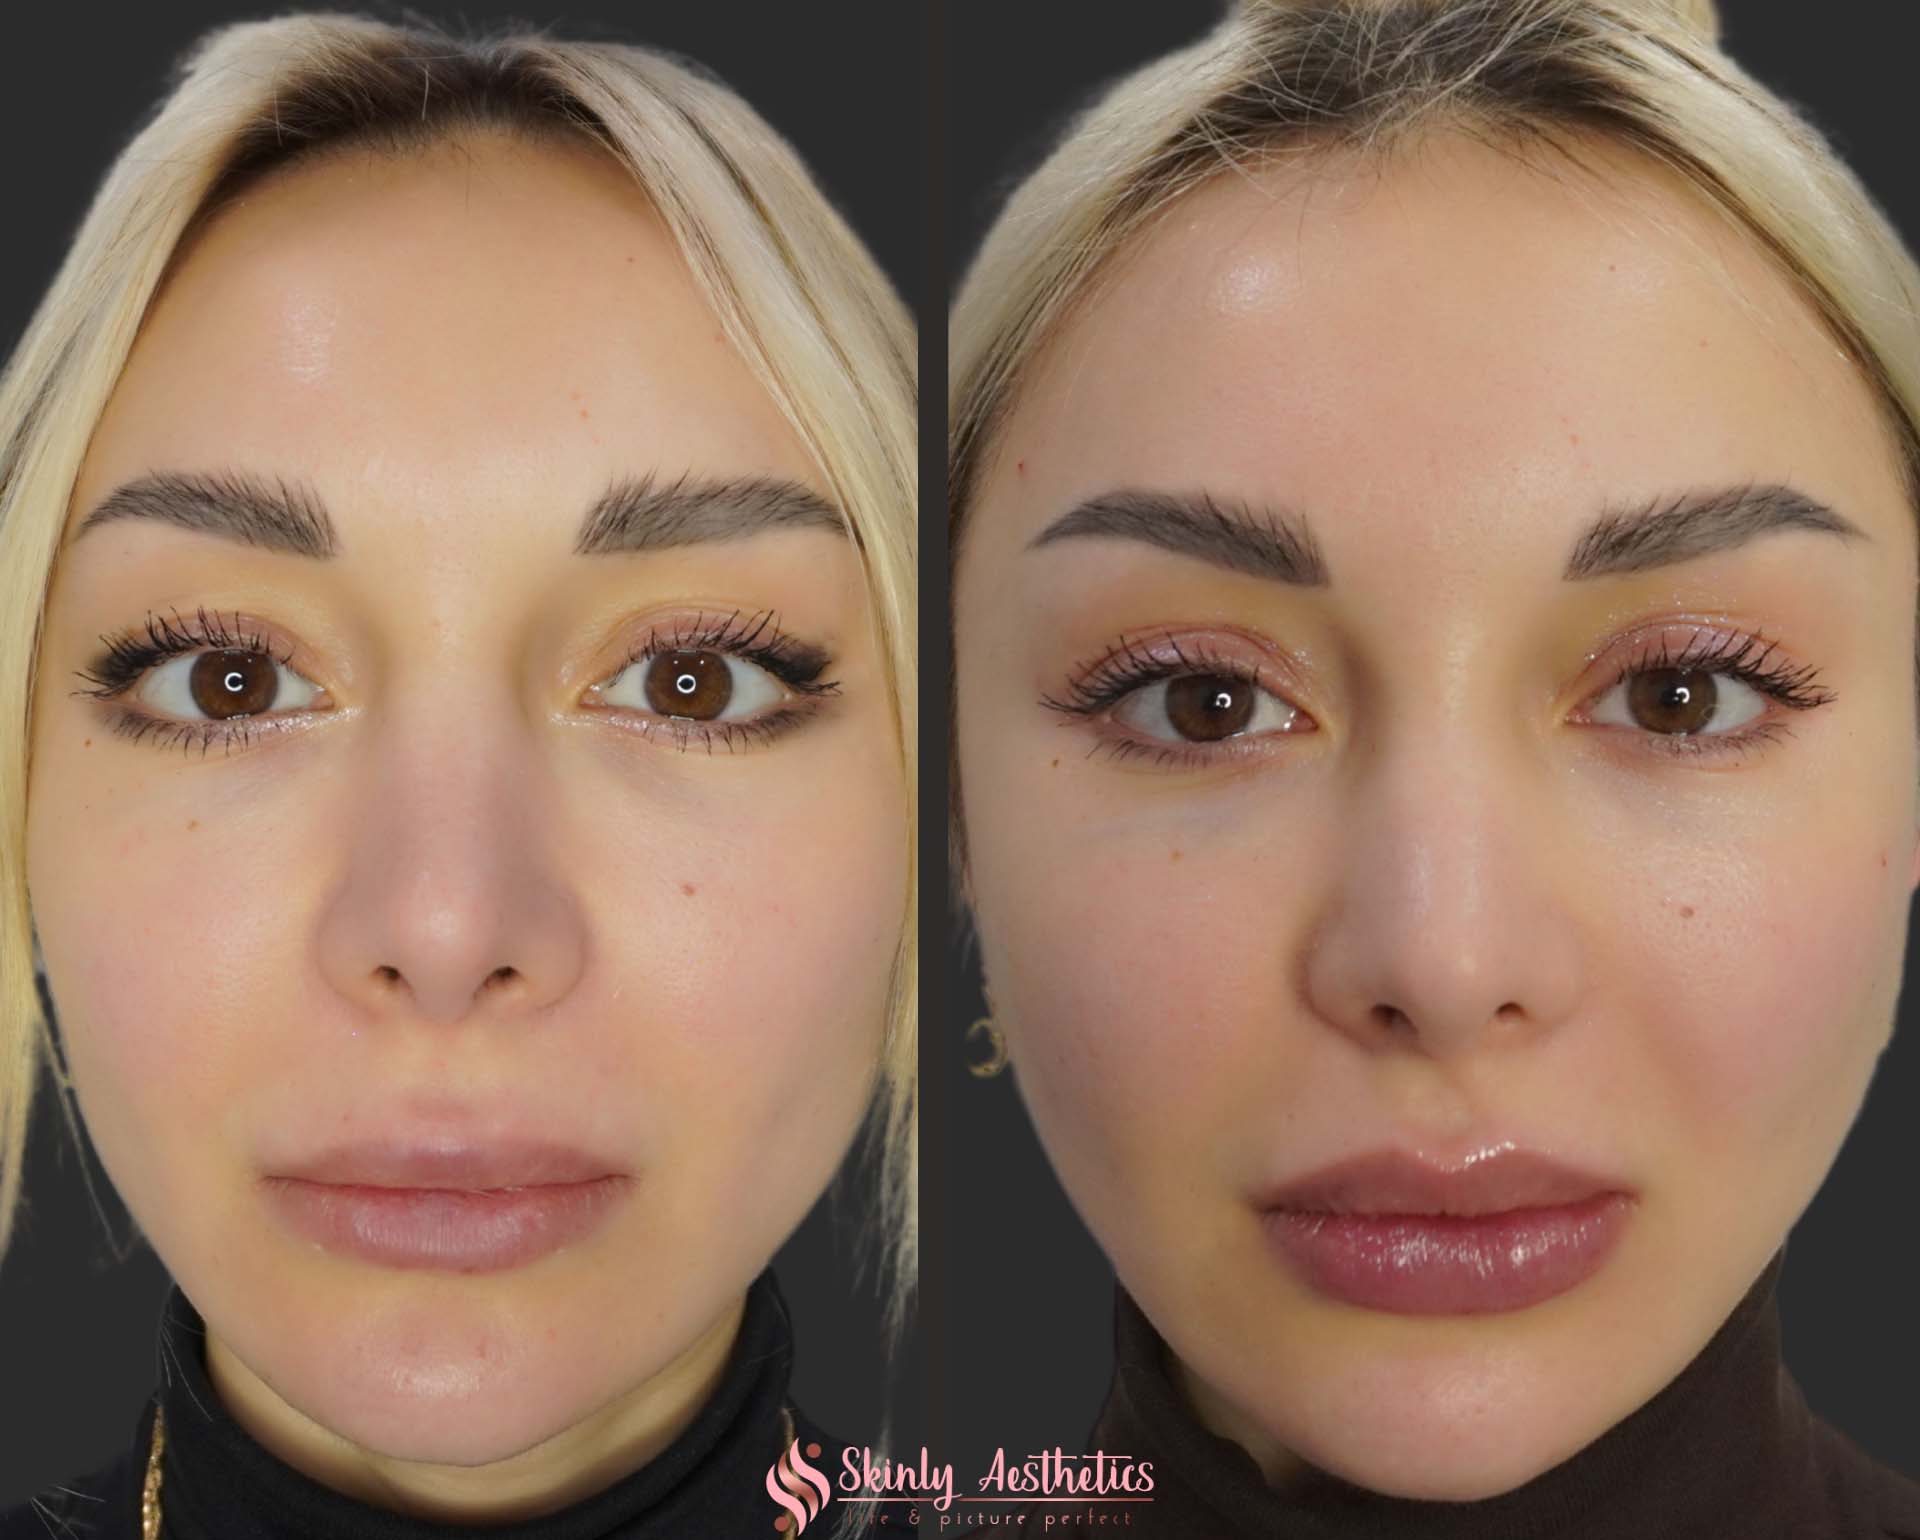 Russian technique lip filler injection before and after results